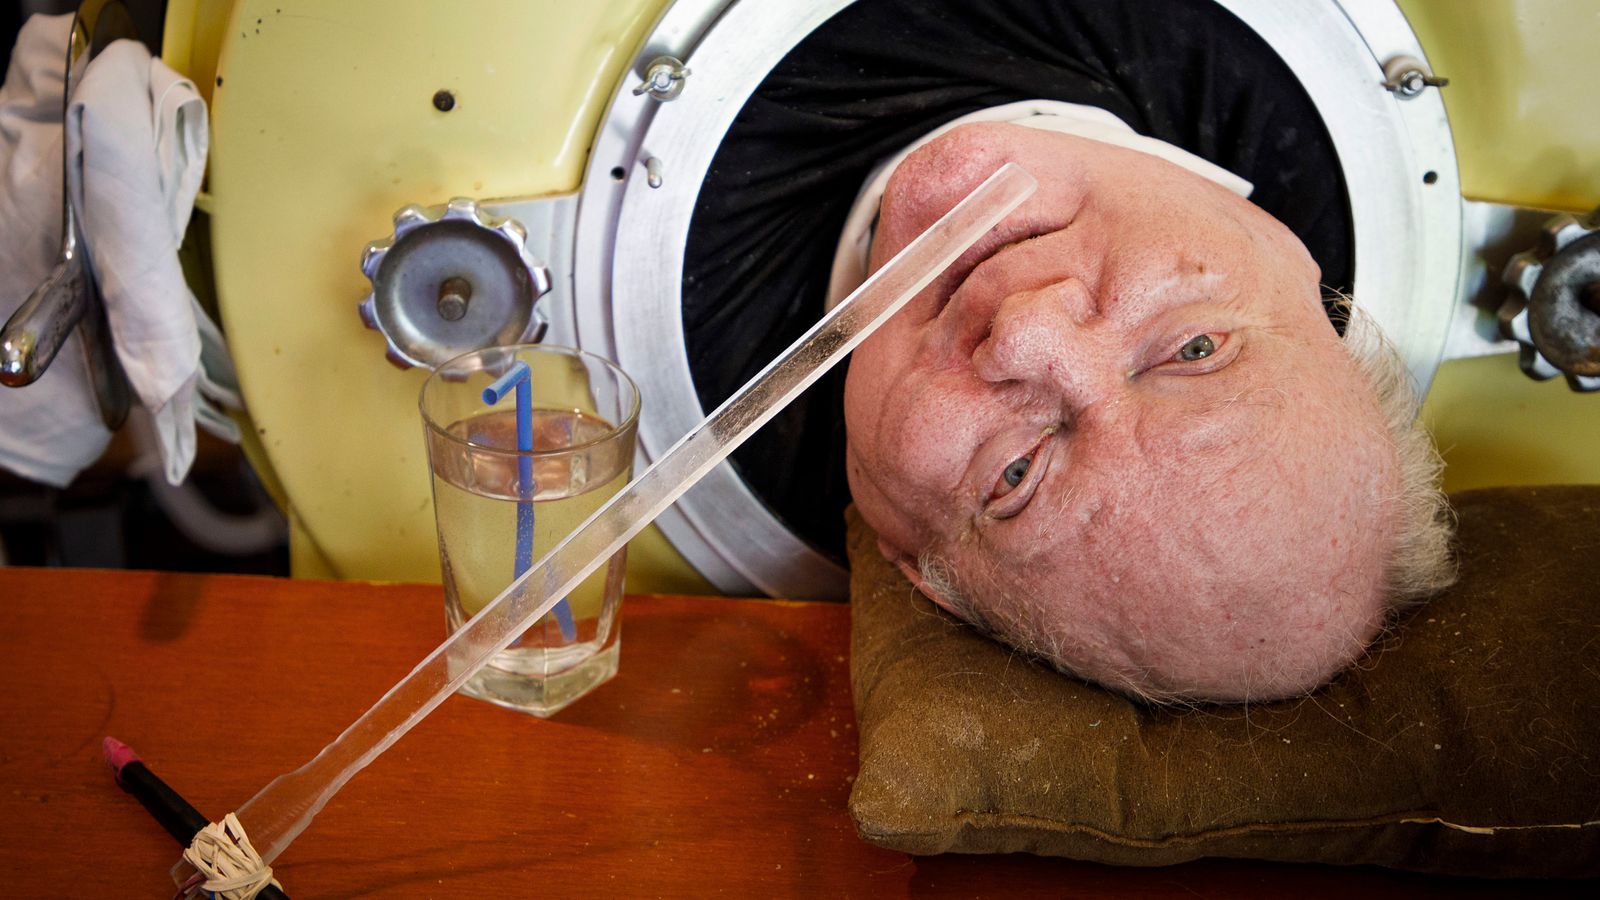 Polio survivor known as \'Polio Paul\' dies at 78 after living in iron lung for 70 years